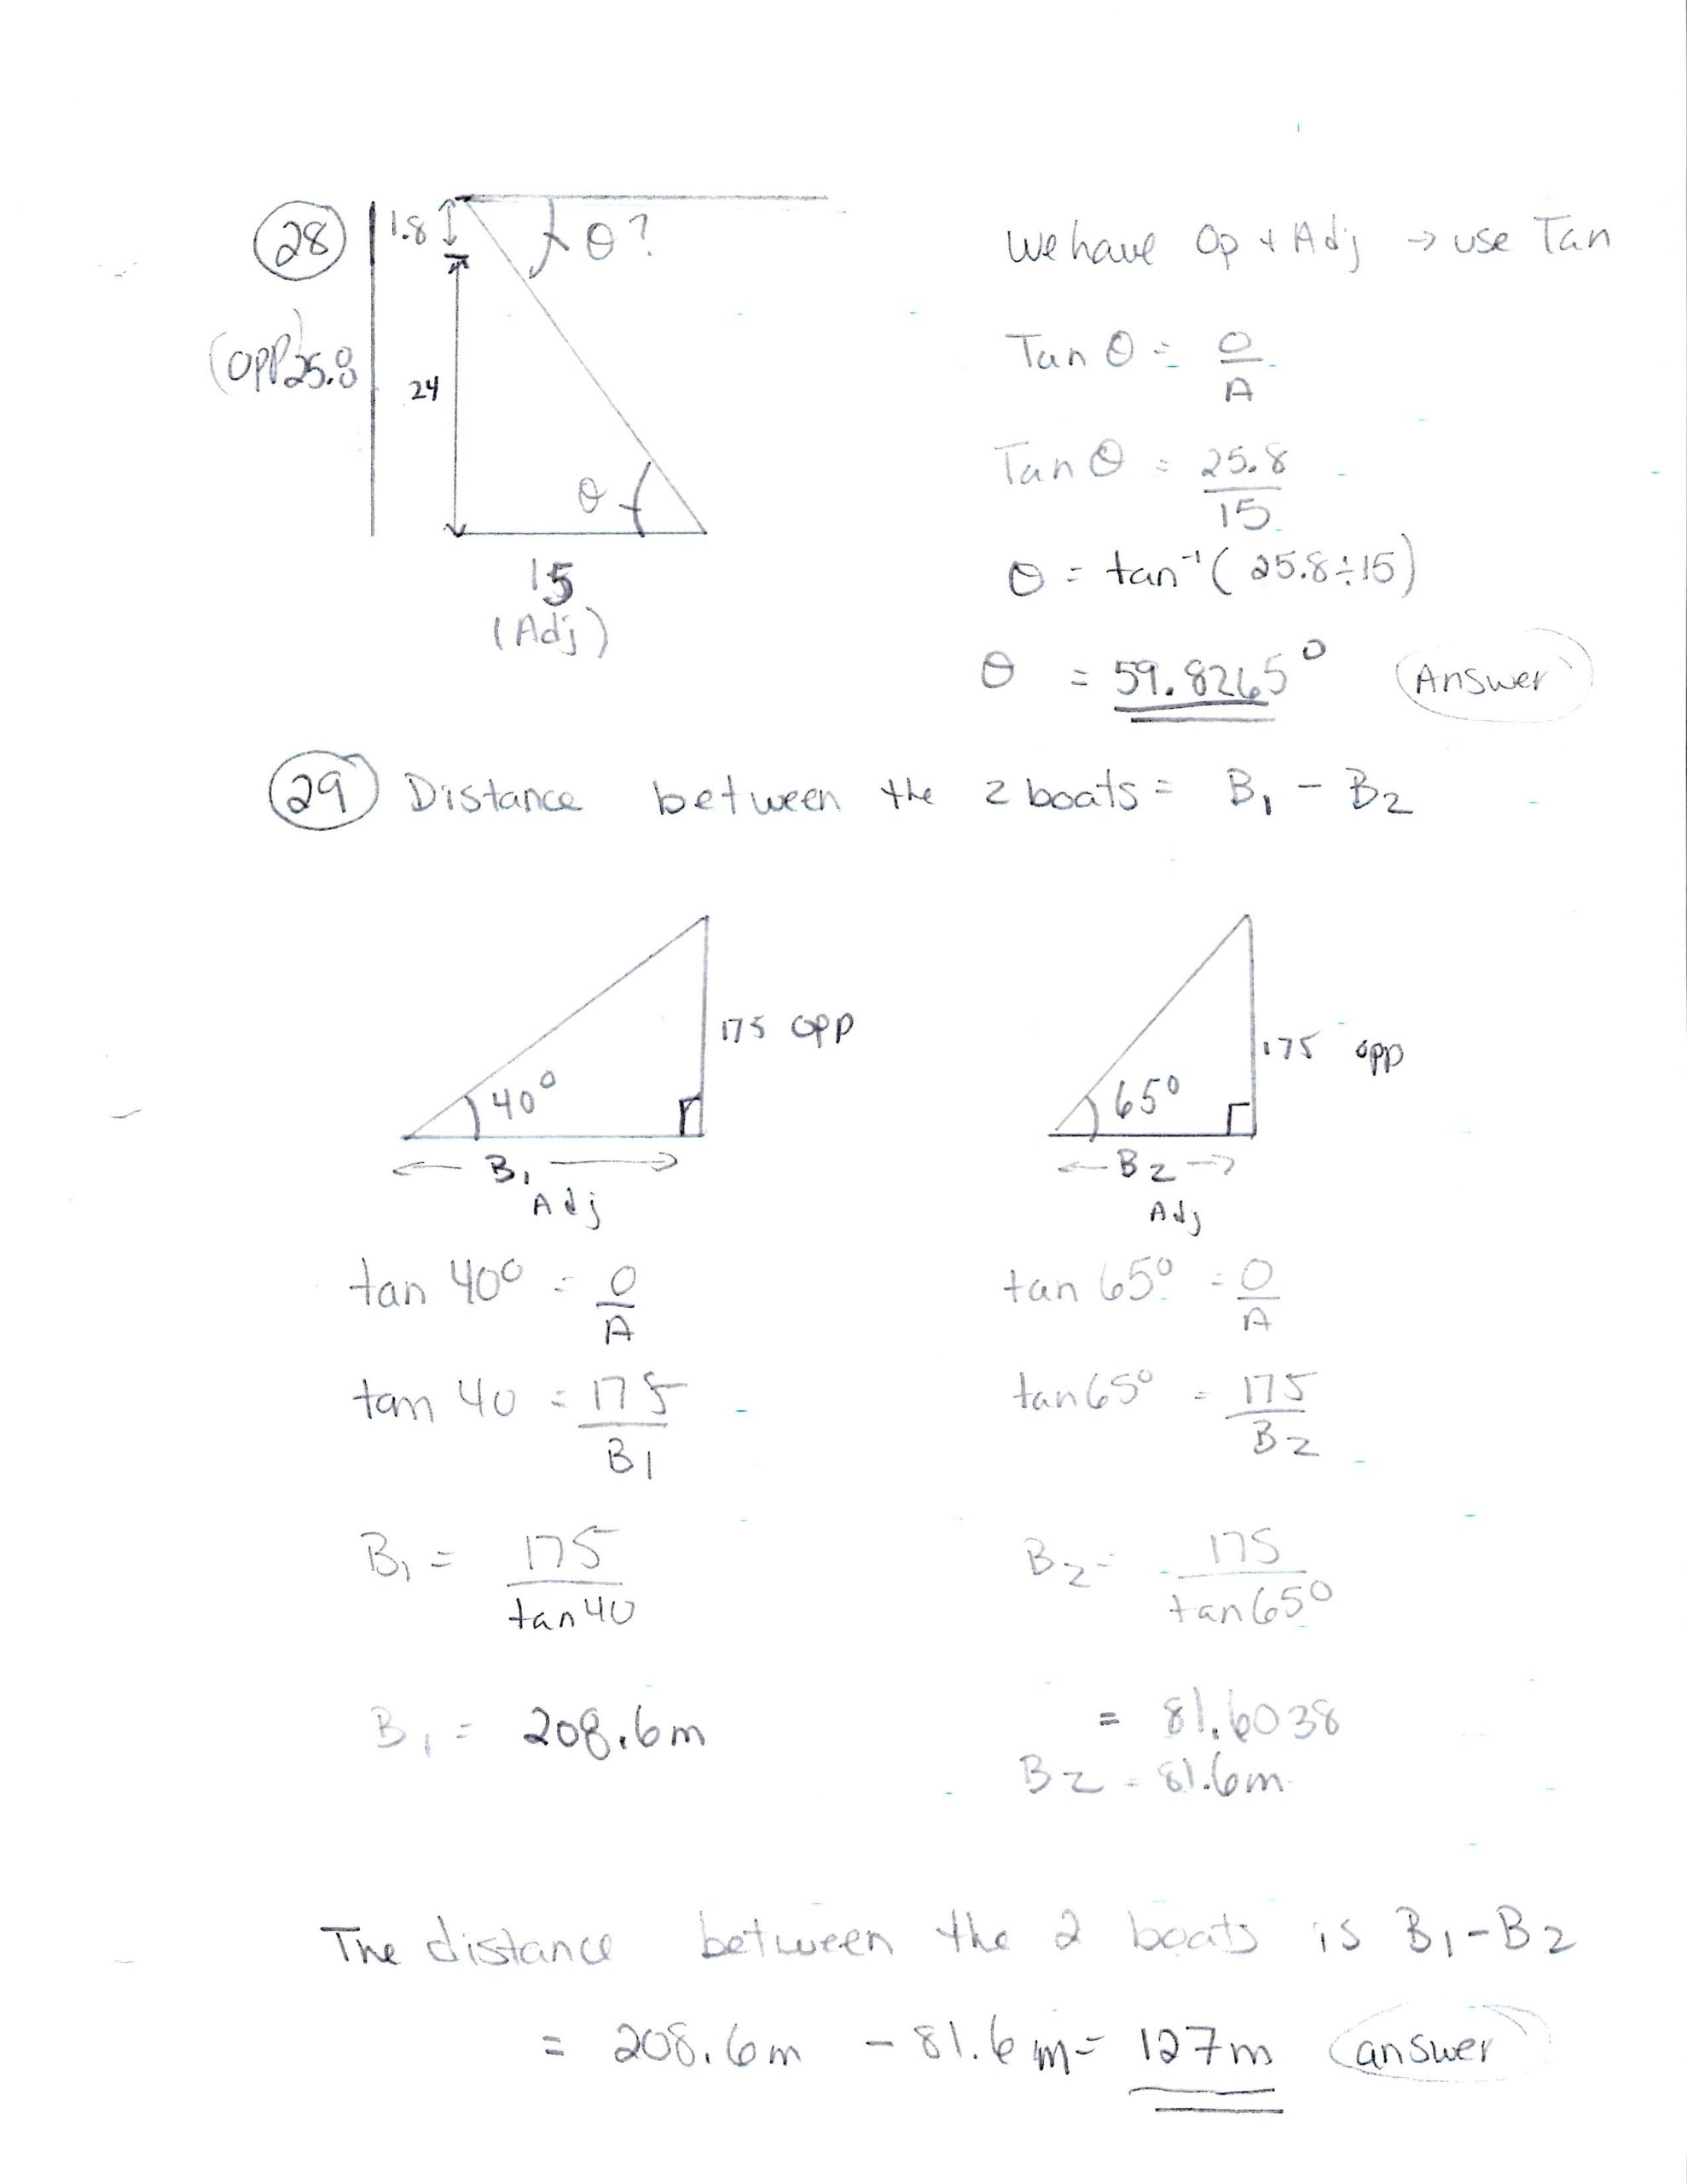 Piecewise Functions Worksheet Answer Key